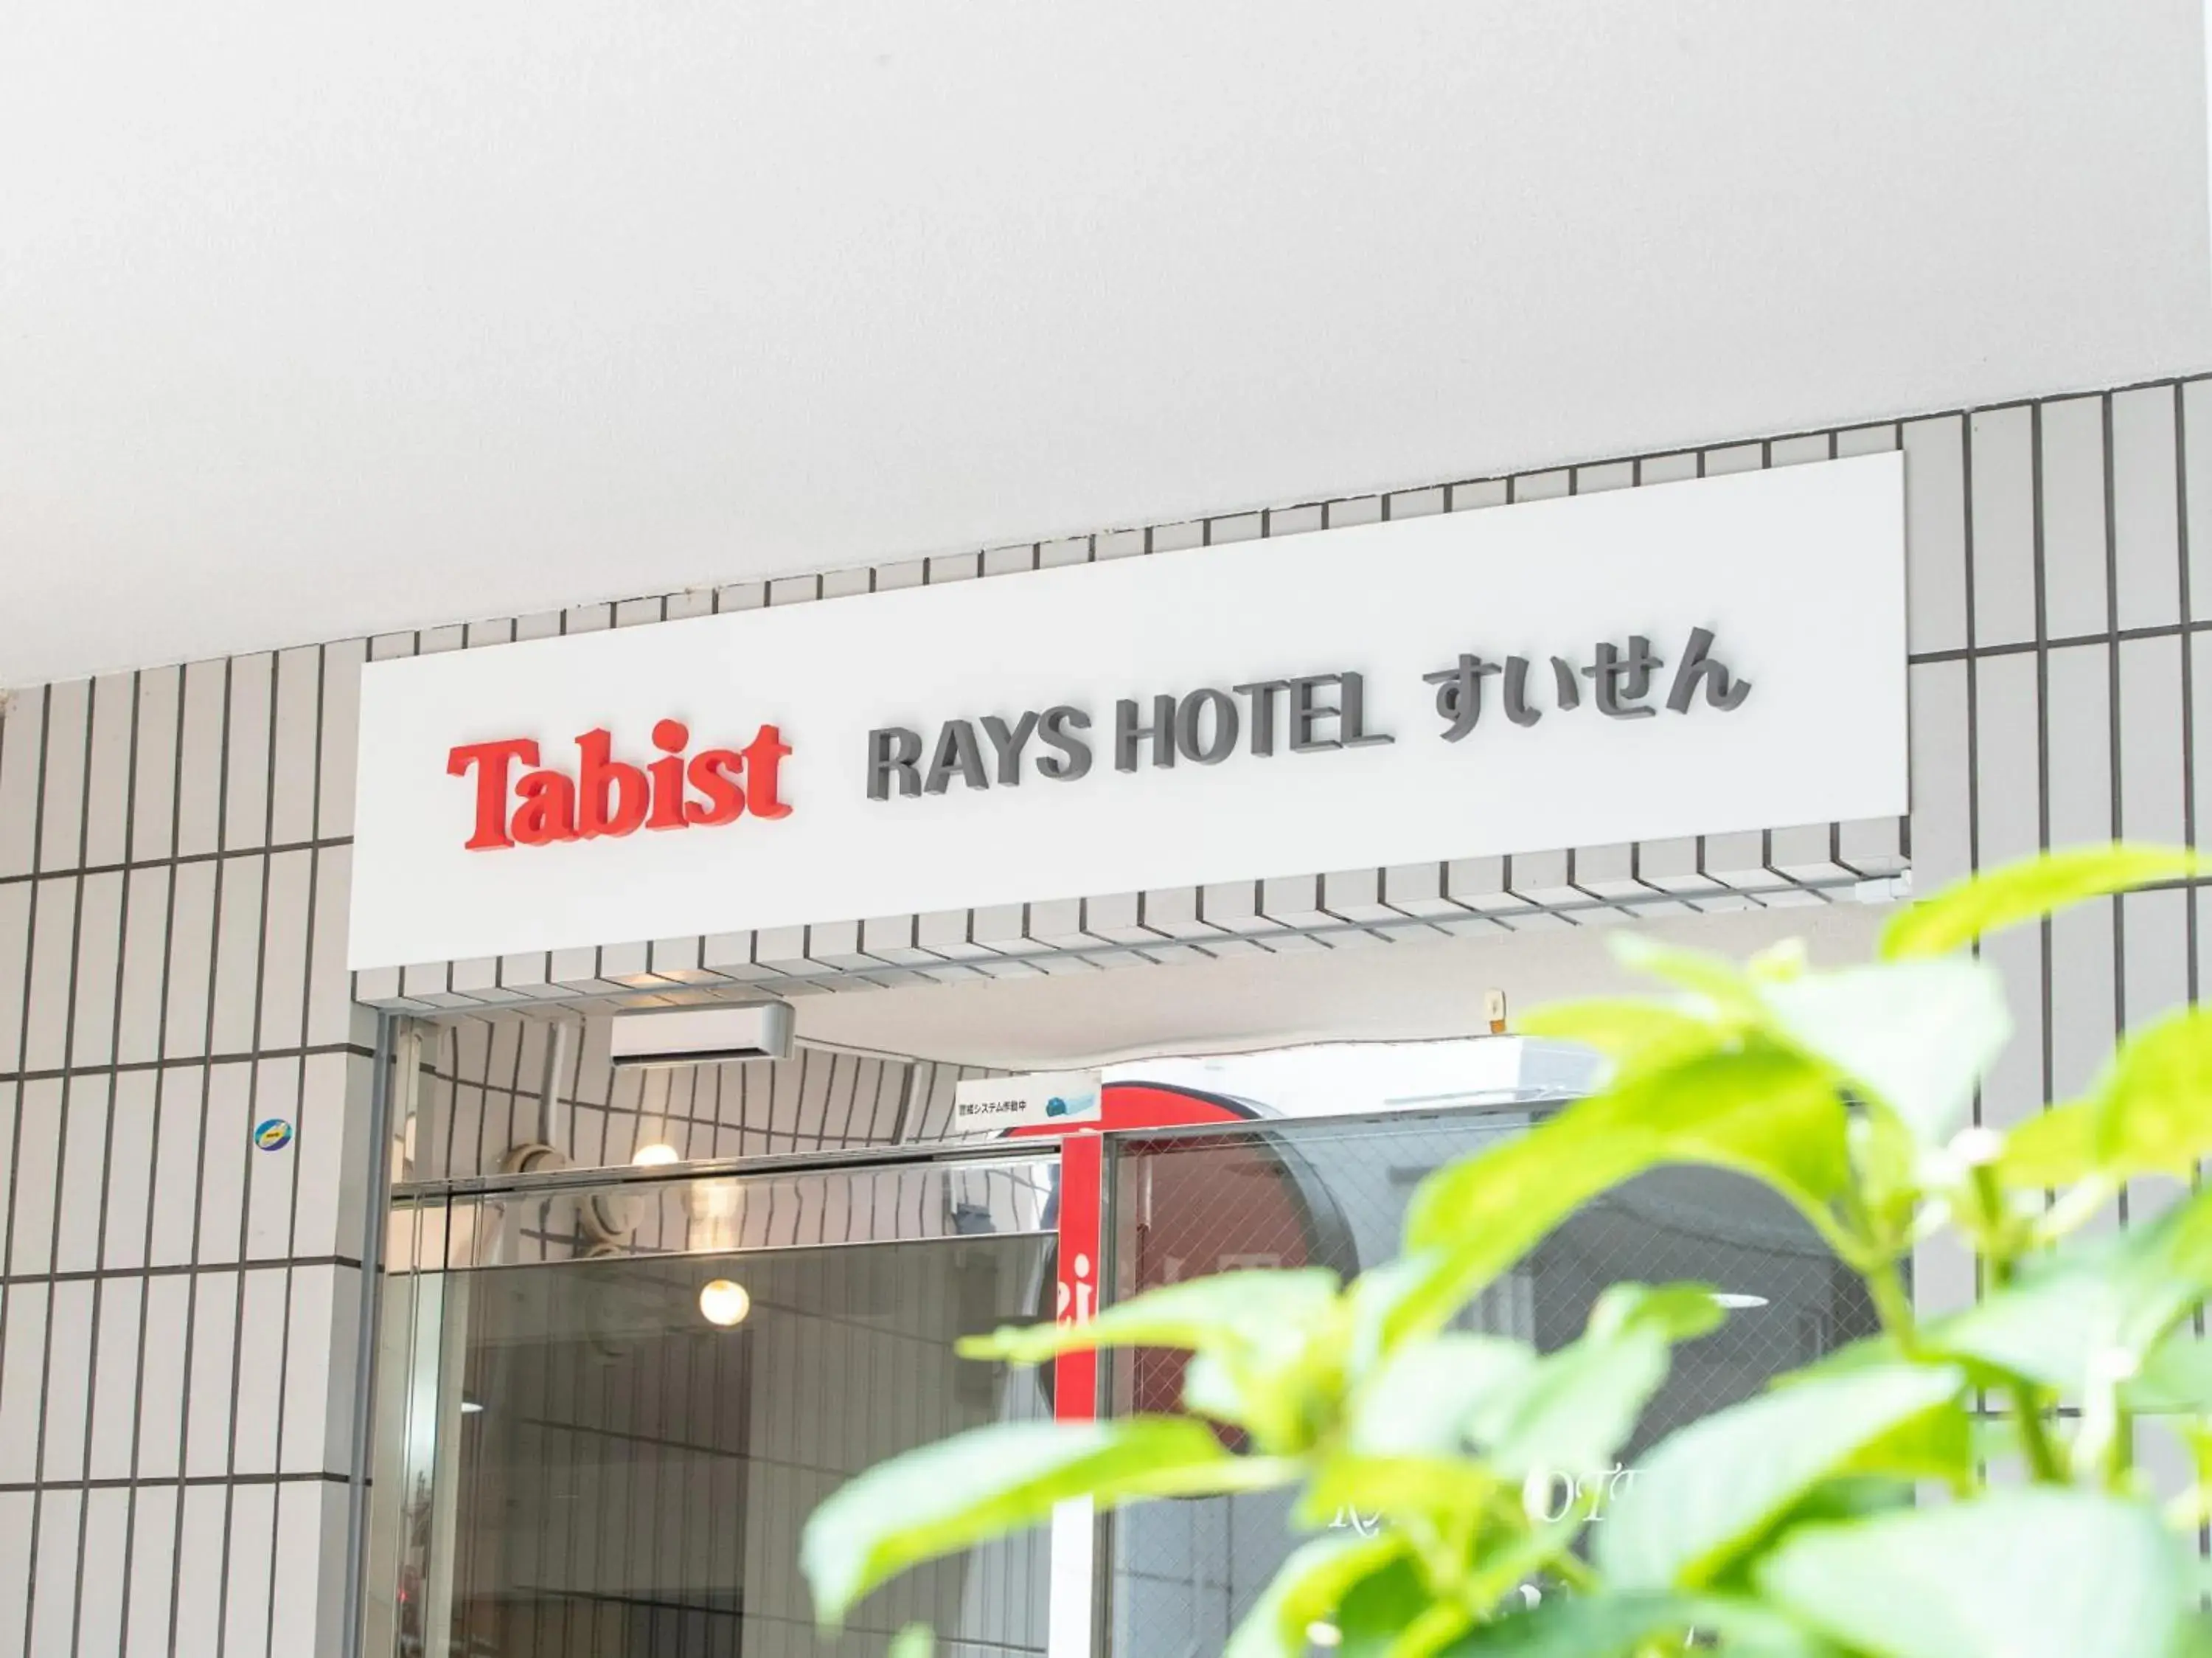 Logo/Certificate/Sign in Tabist Rays Hotel Suisen